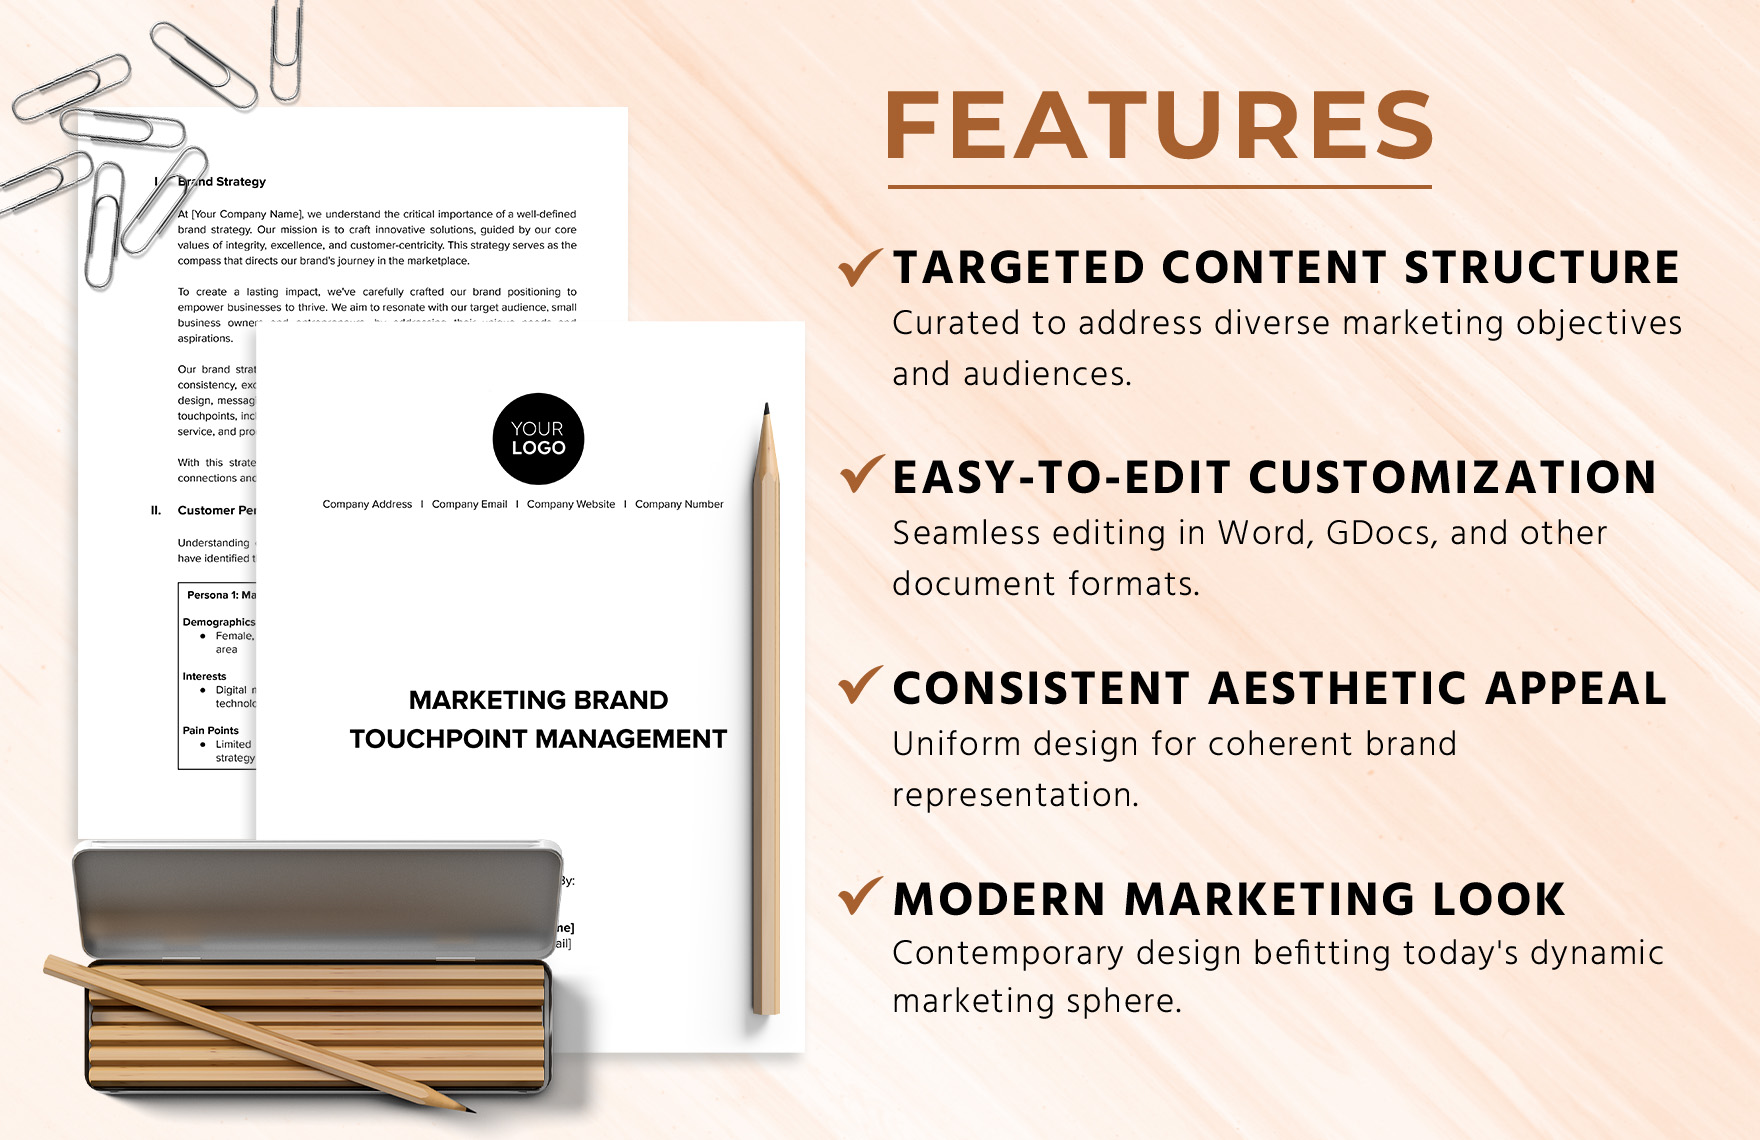 Marketing Brand Touchpoint Management Template